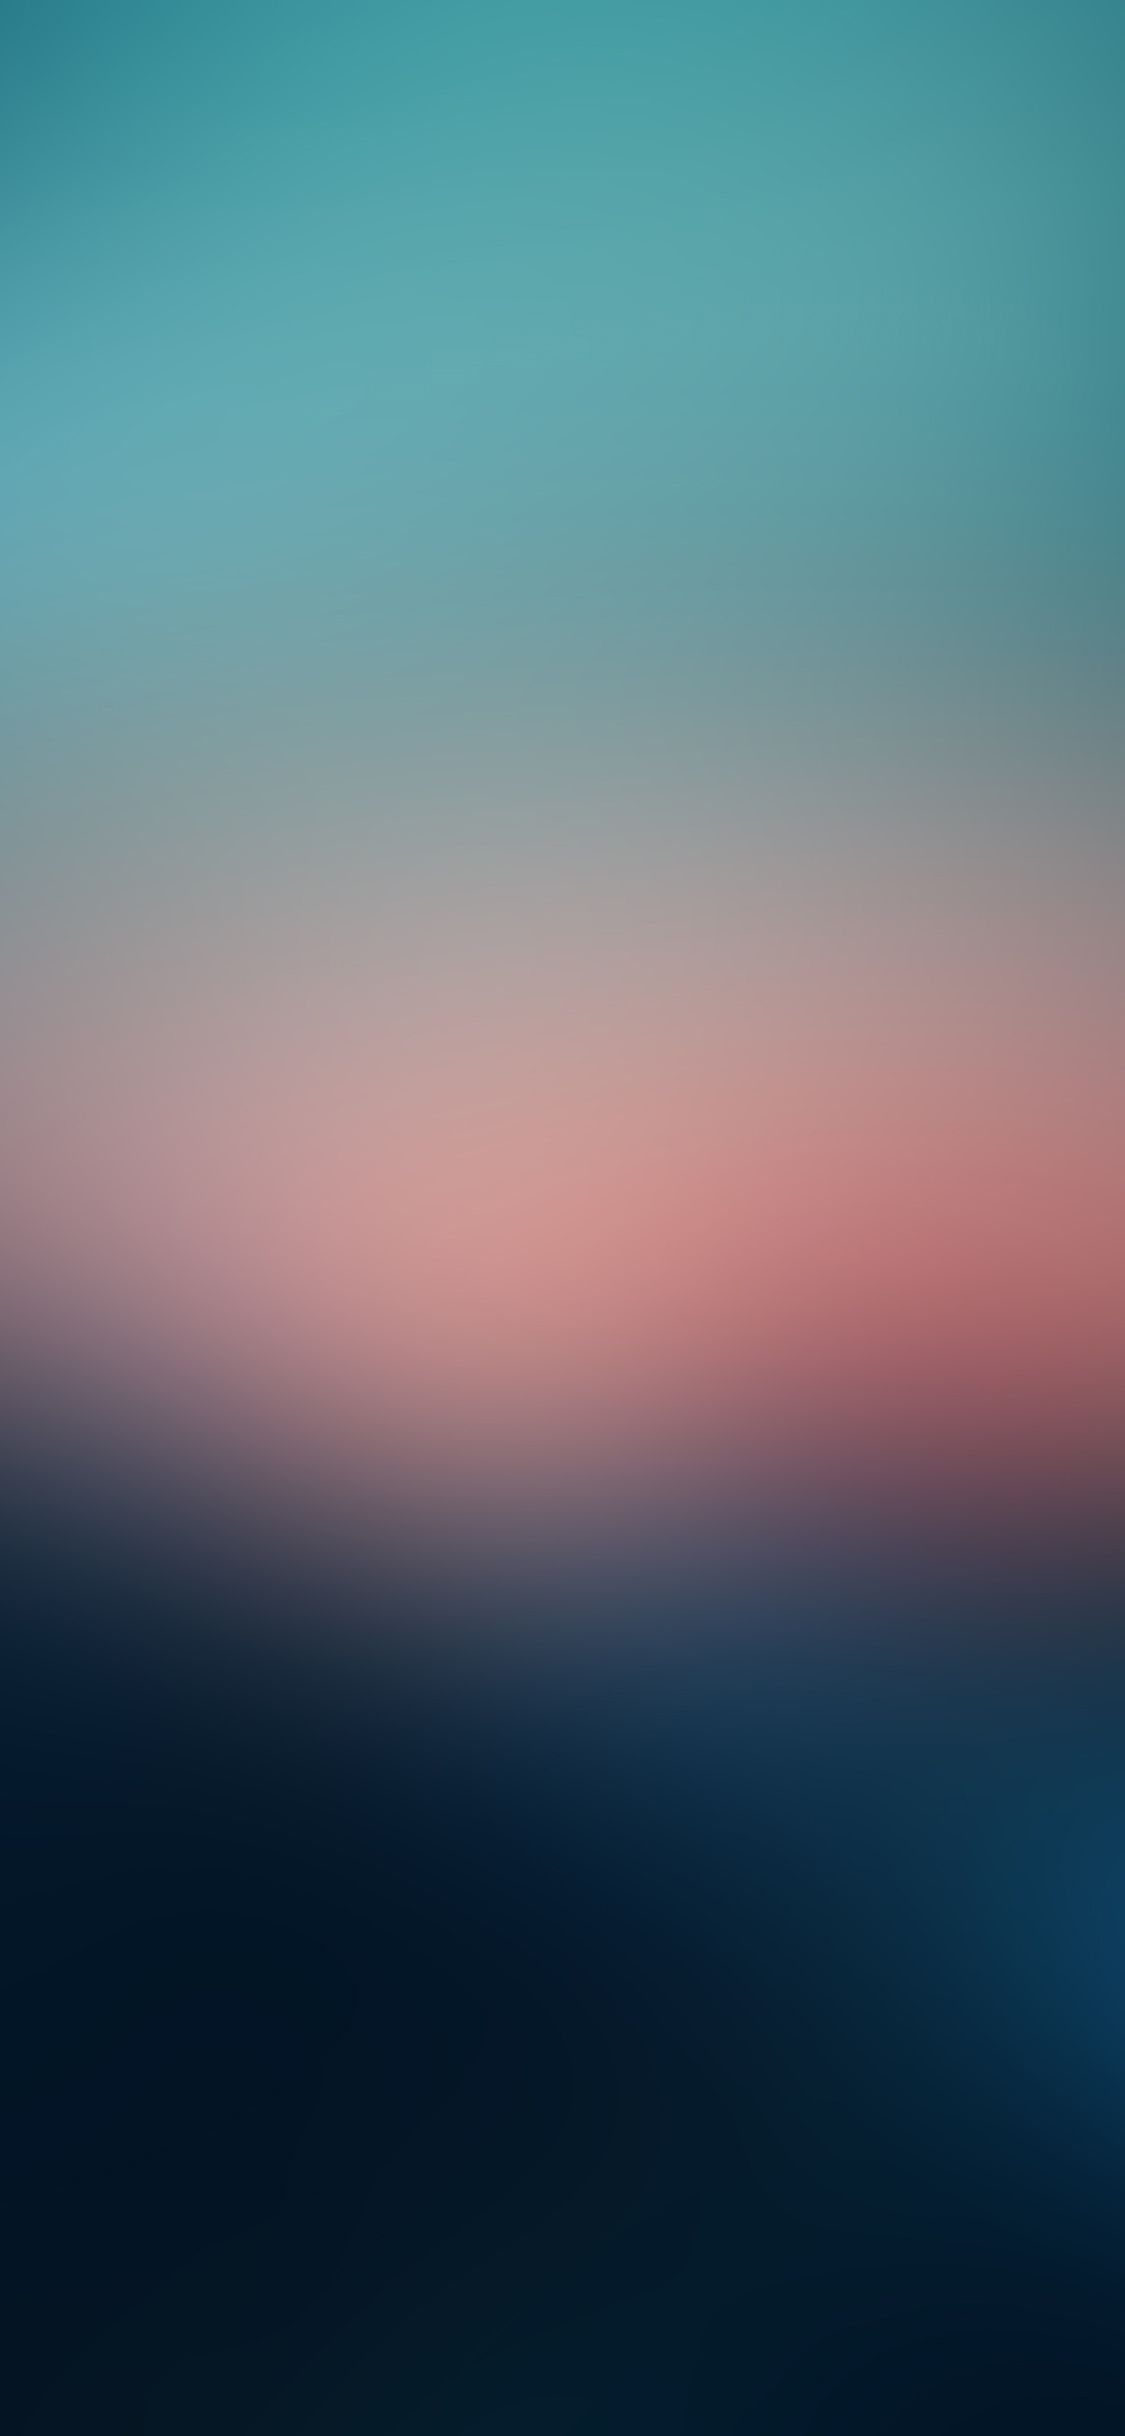 IPhone wallpaper sunset, sunrise, the sky, orange, blue, pink, red, blurred background - Blurry